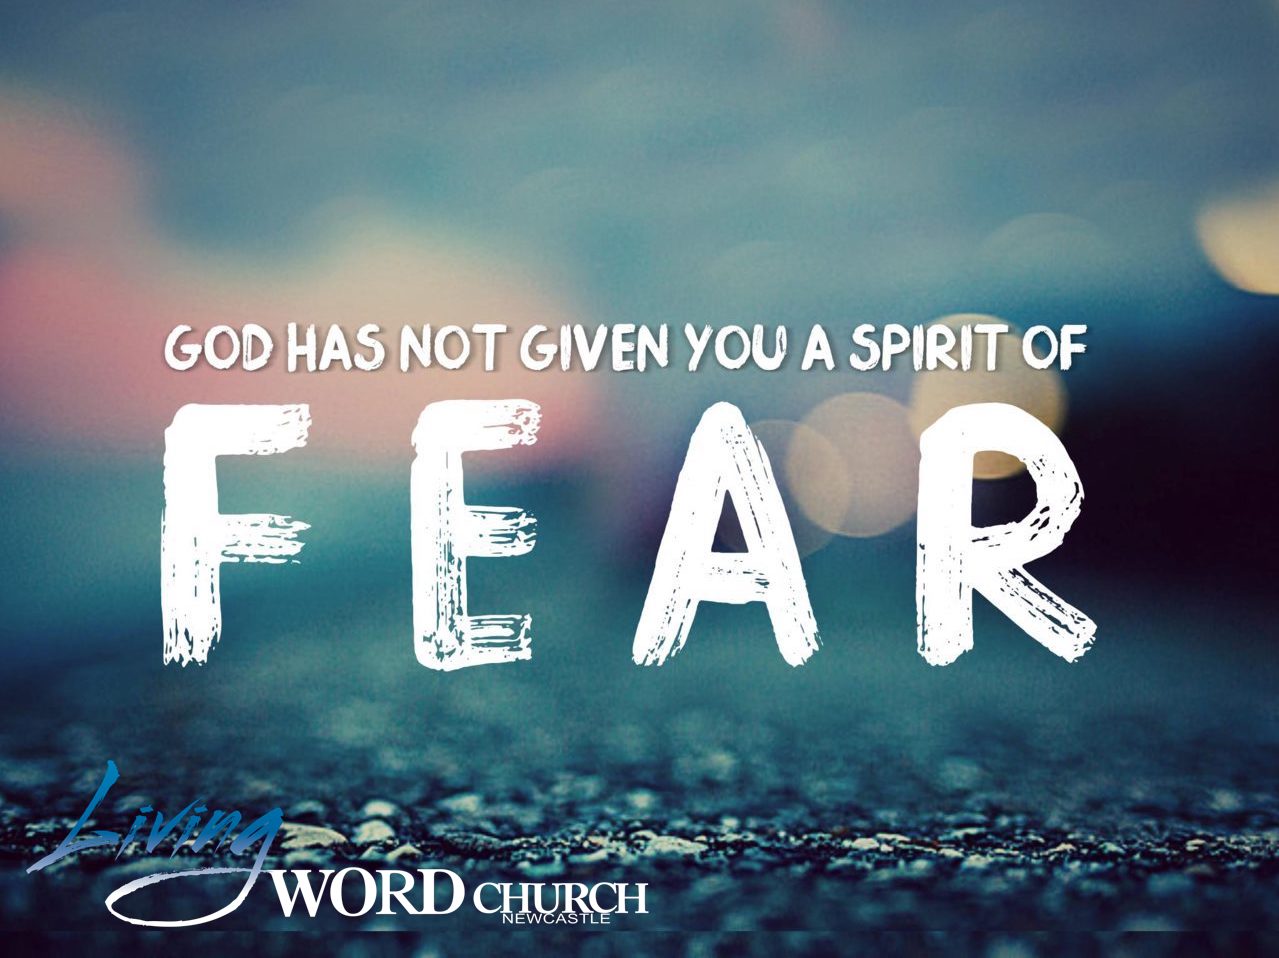 God has not given you a spirit of Fear